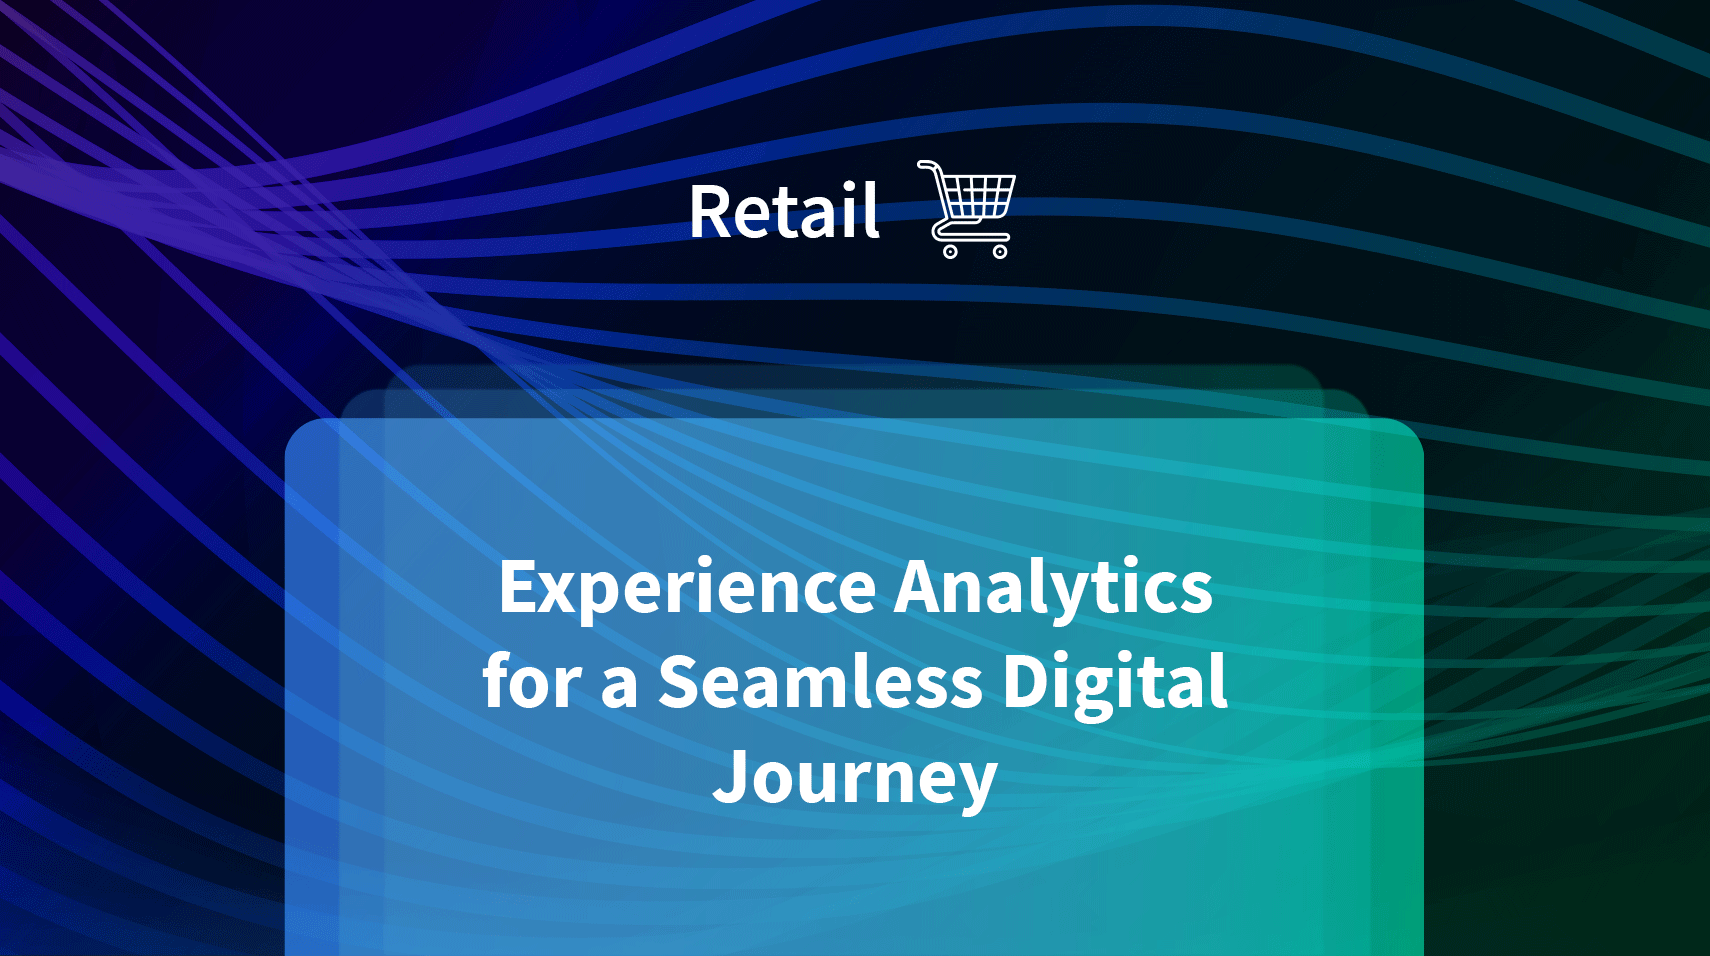 Experience Analytics for a Seamless Digital Journey